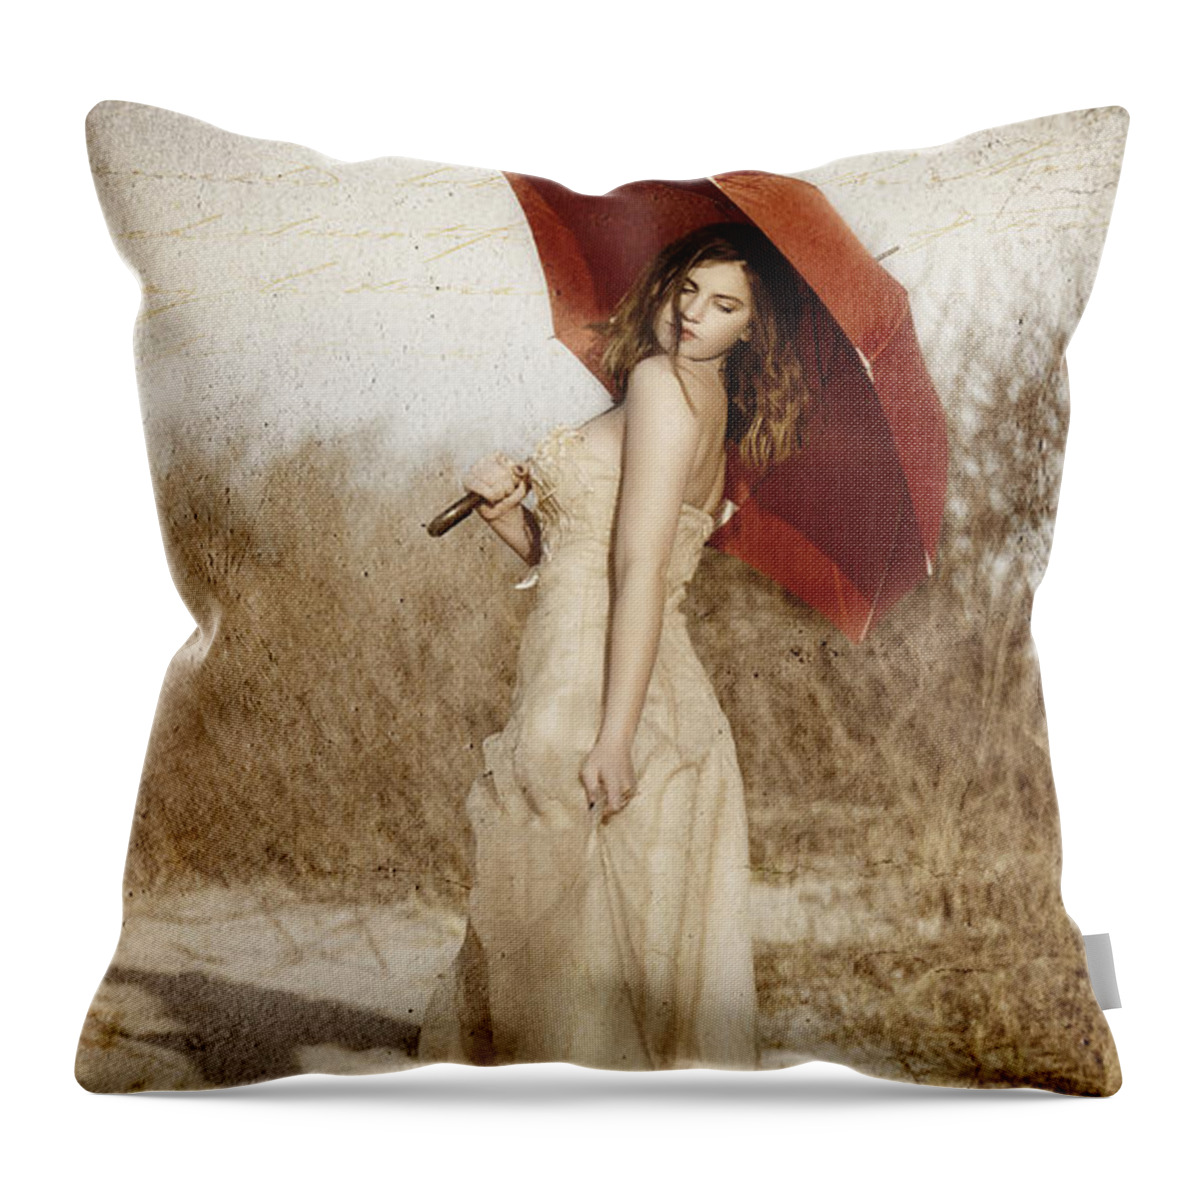 This Is A Piece Of Art That Combines Photography Throw Pillow featuring the photograph Painted Lady Narrow by Alissa Beth Photography